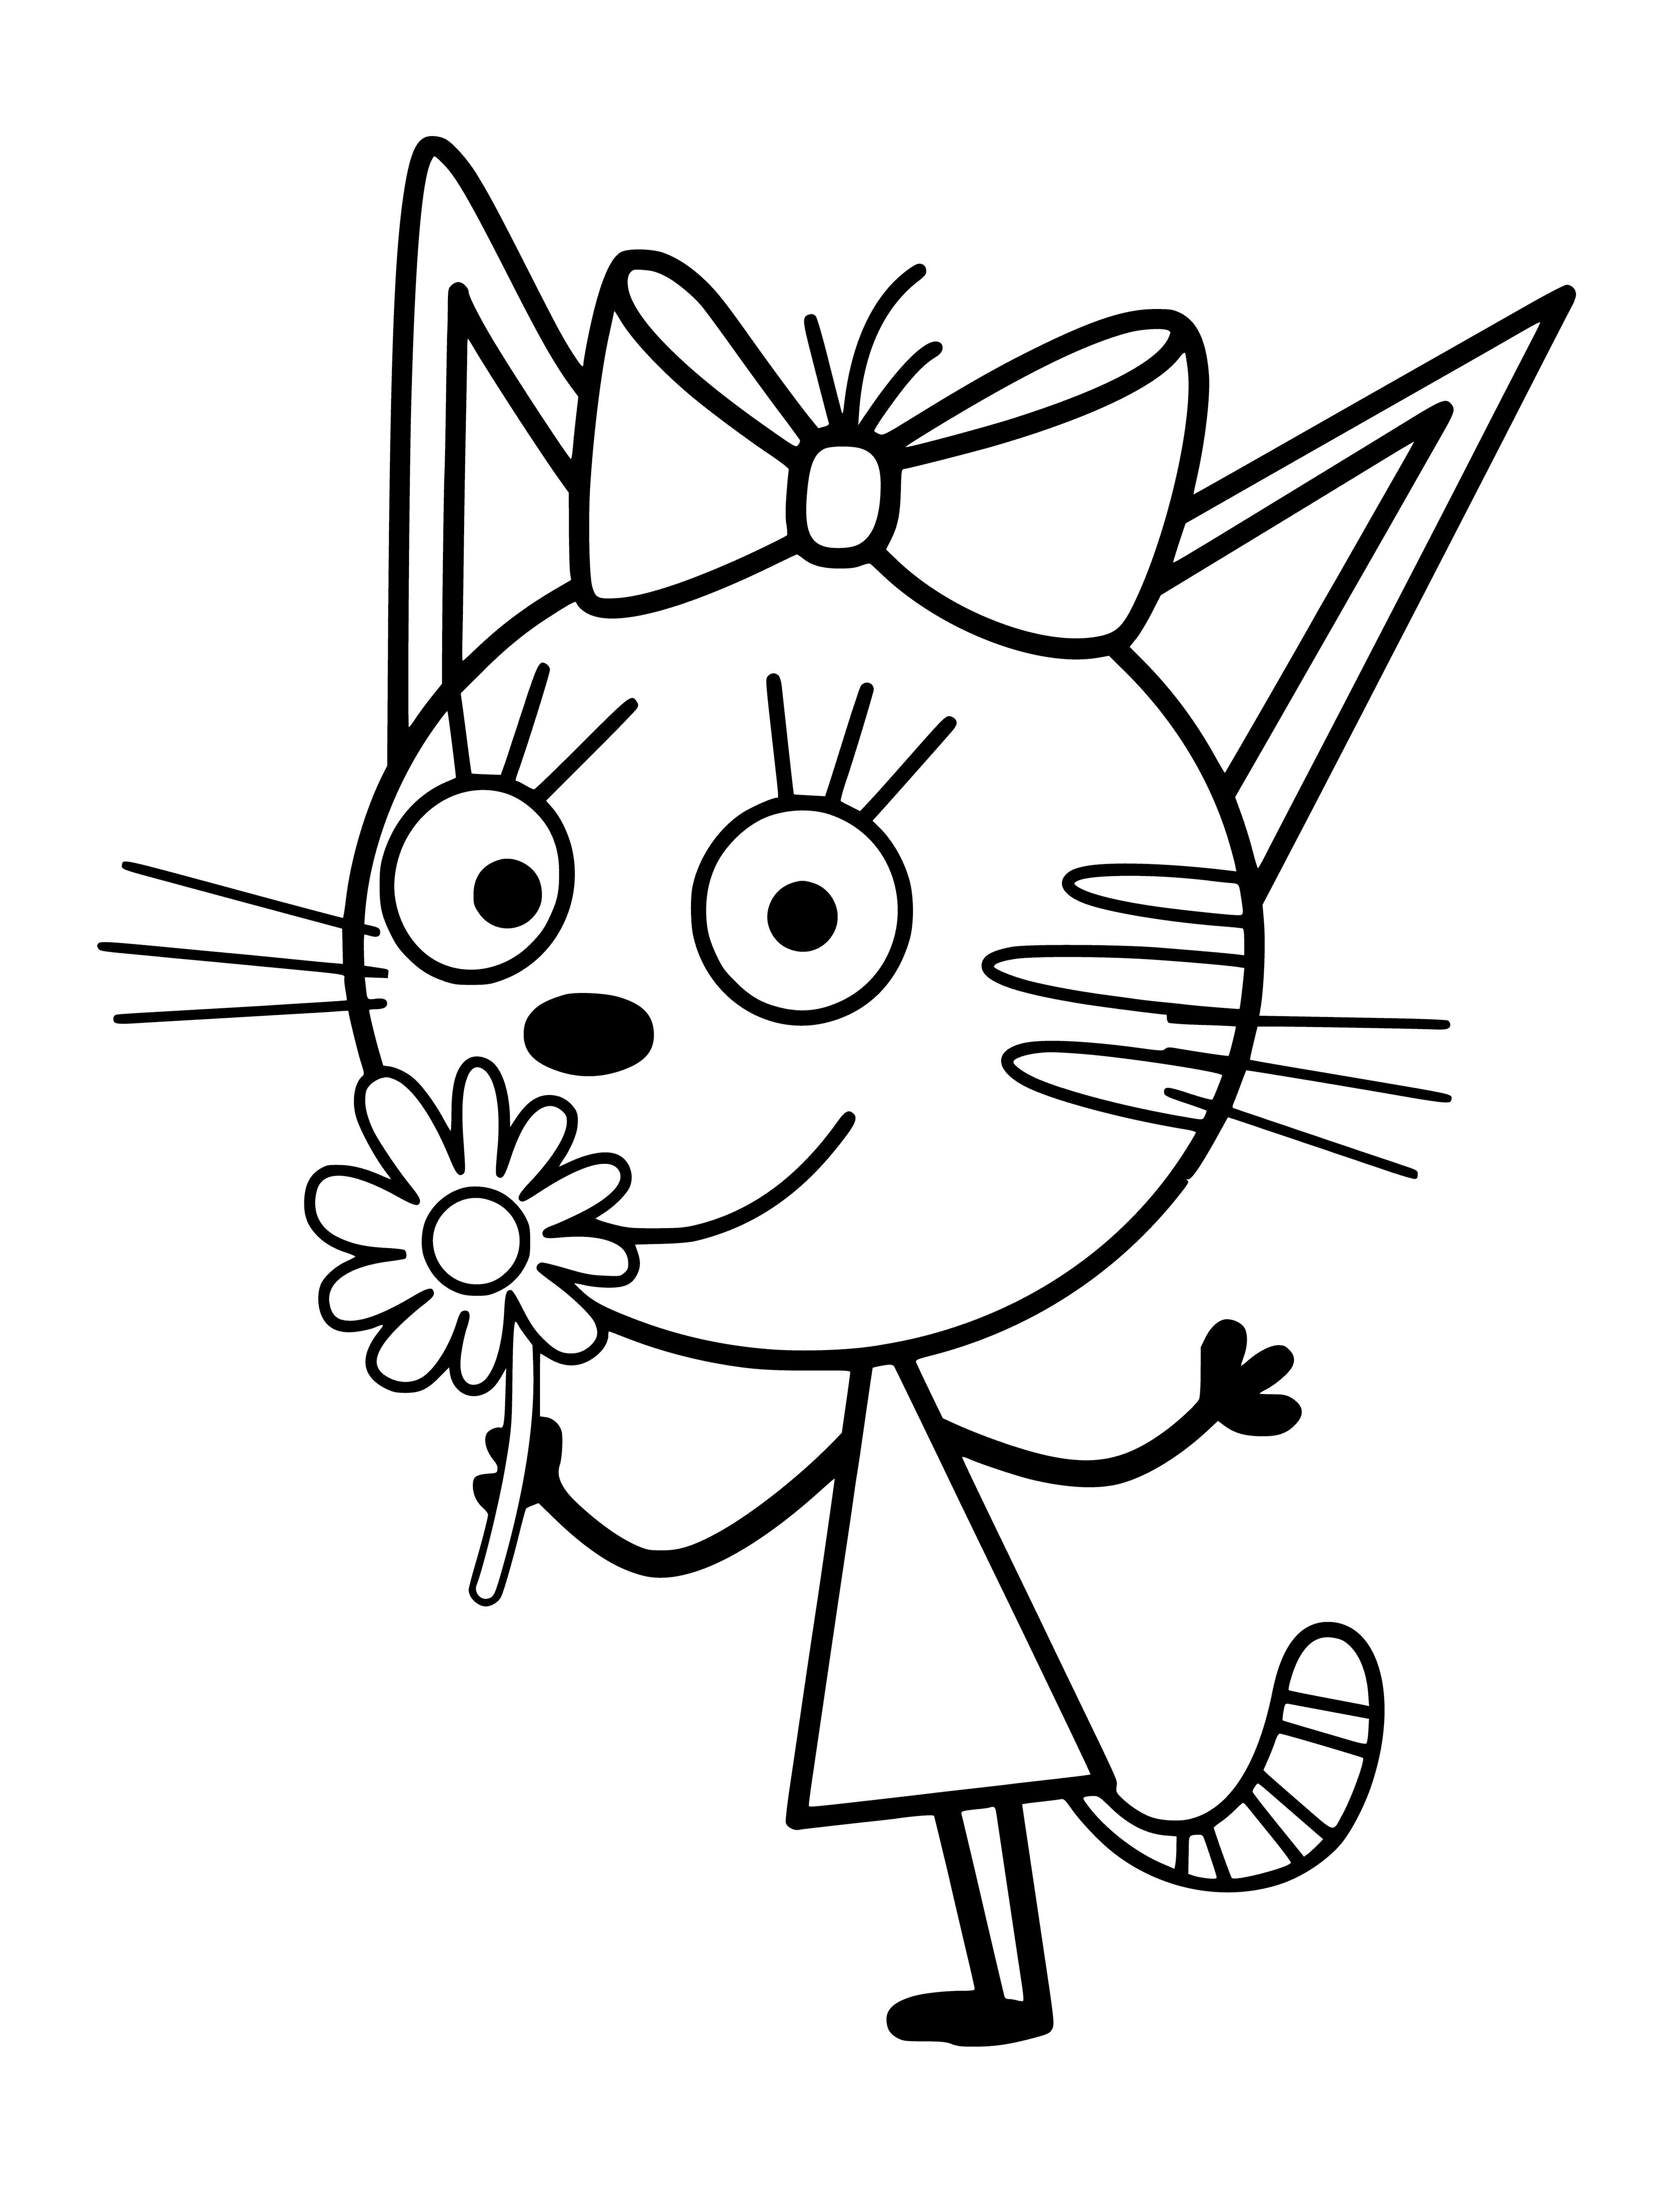 coloring page: Two cats watch as a light brown one leans over a pink flower. All have different colored eyes and expressions, from serious to playful.